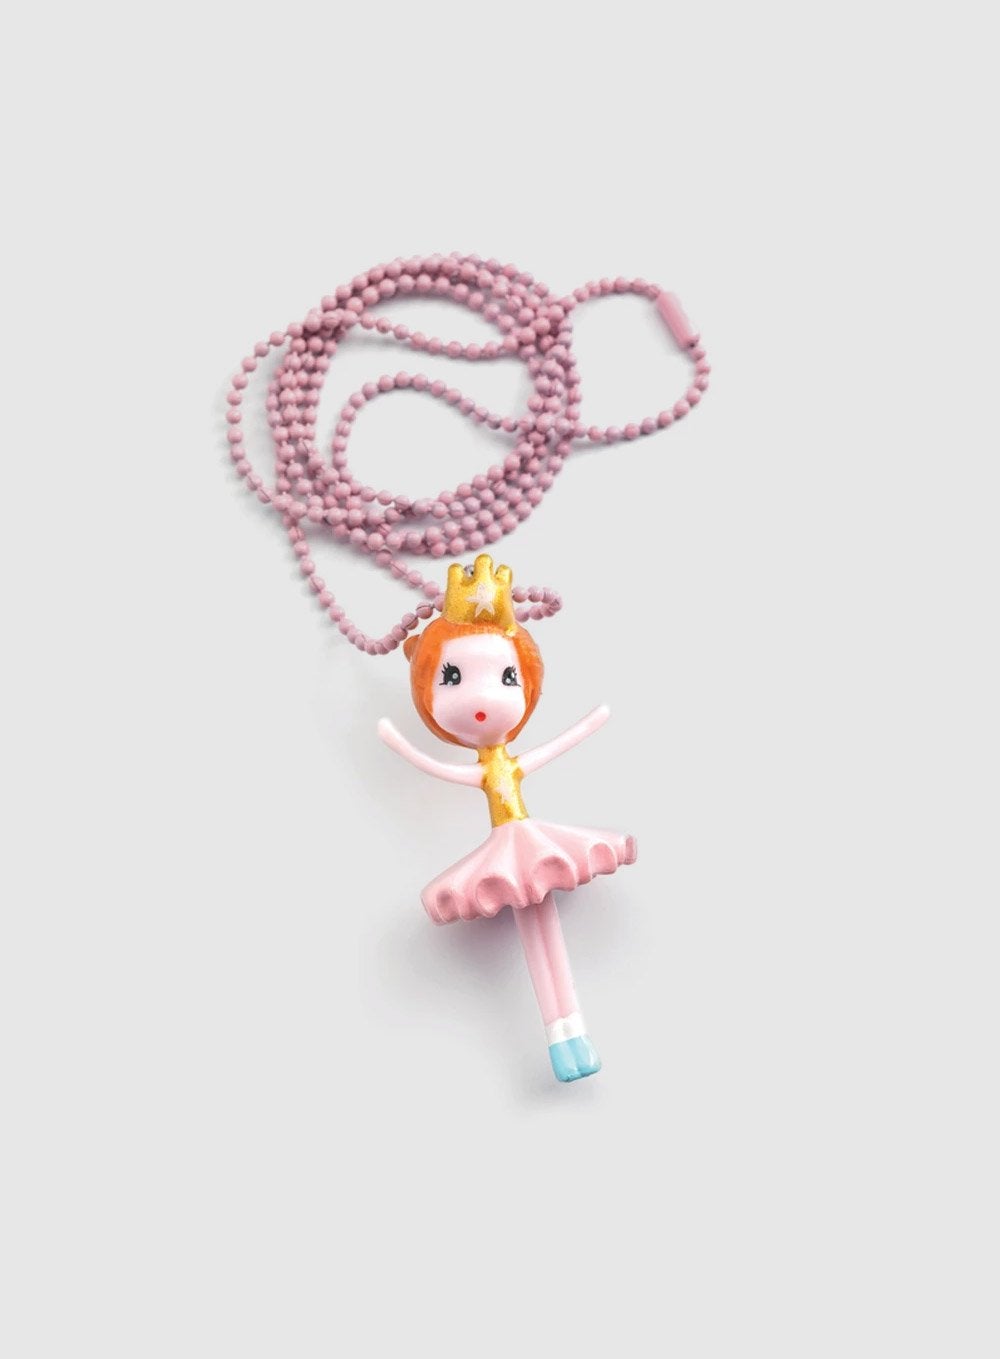 Djeco Jewellery Lovely Charms Ballerina Necklace - Trotters Childrenswear